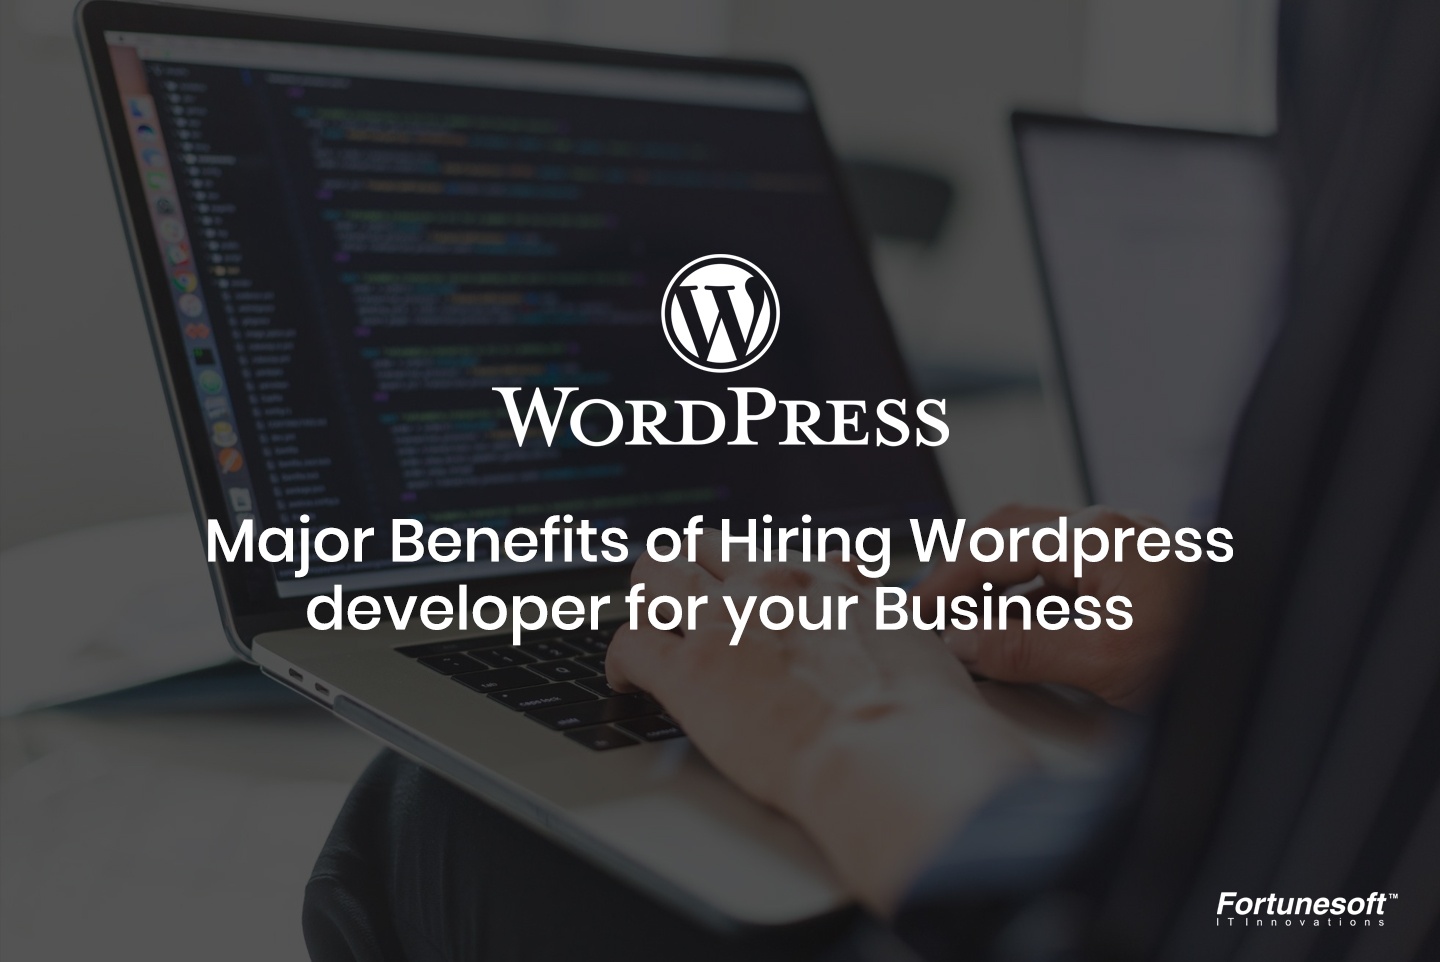 WordPress News: Why to hire Wordpress developers for your business